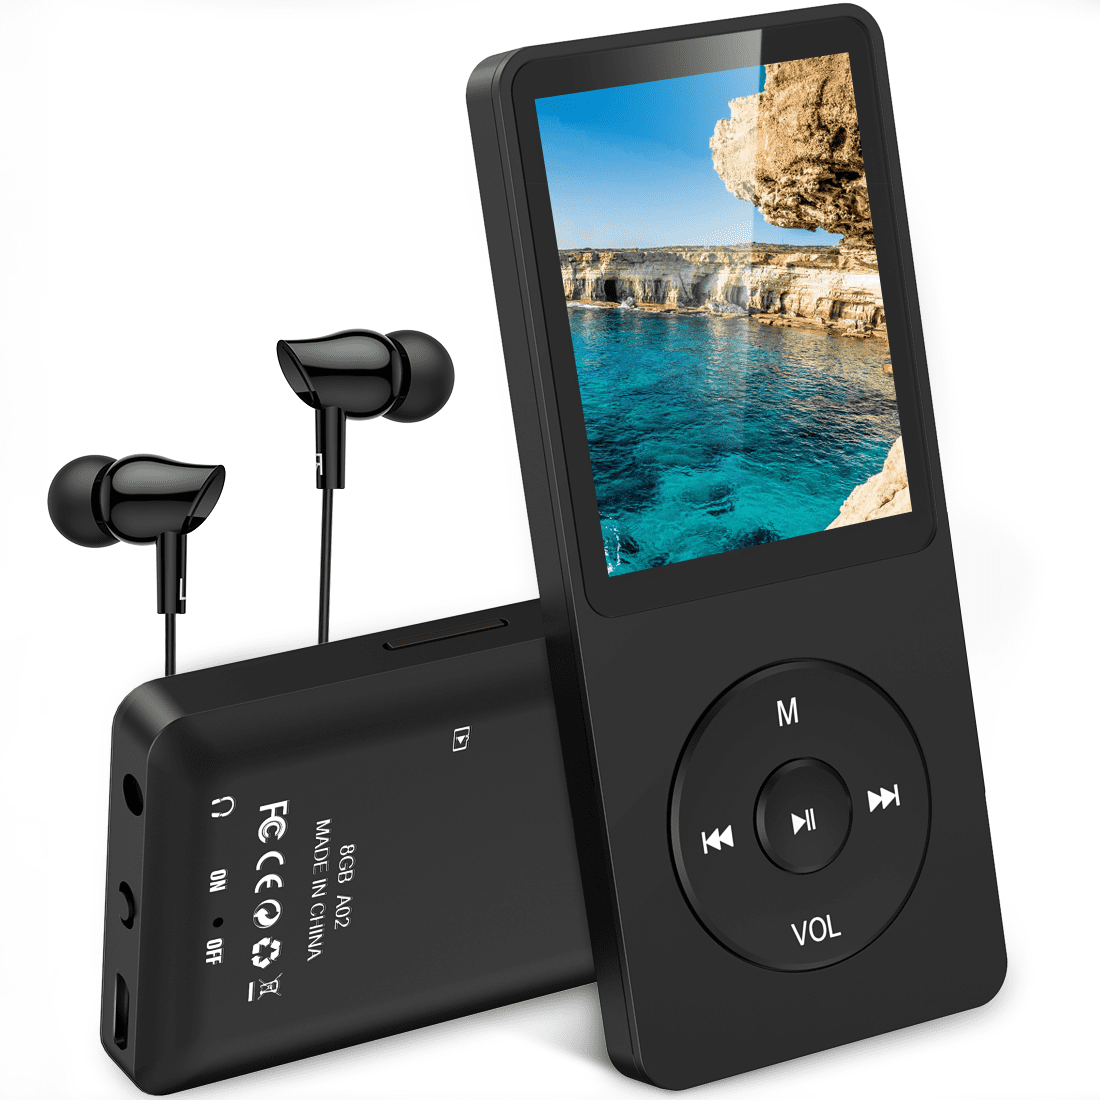 Dark Blue 70 Hours Playback Lossless Sound Music Player,Supports up to 128GB AGPTEK A02 8GB MP3 Player 